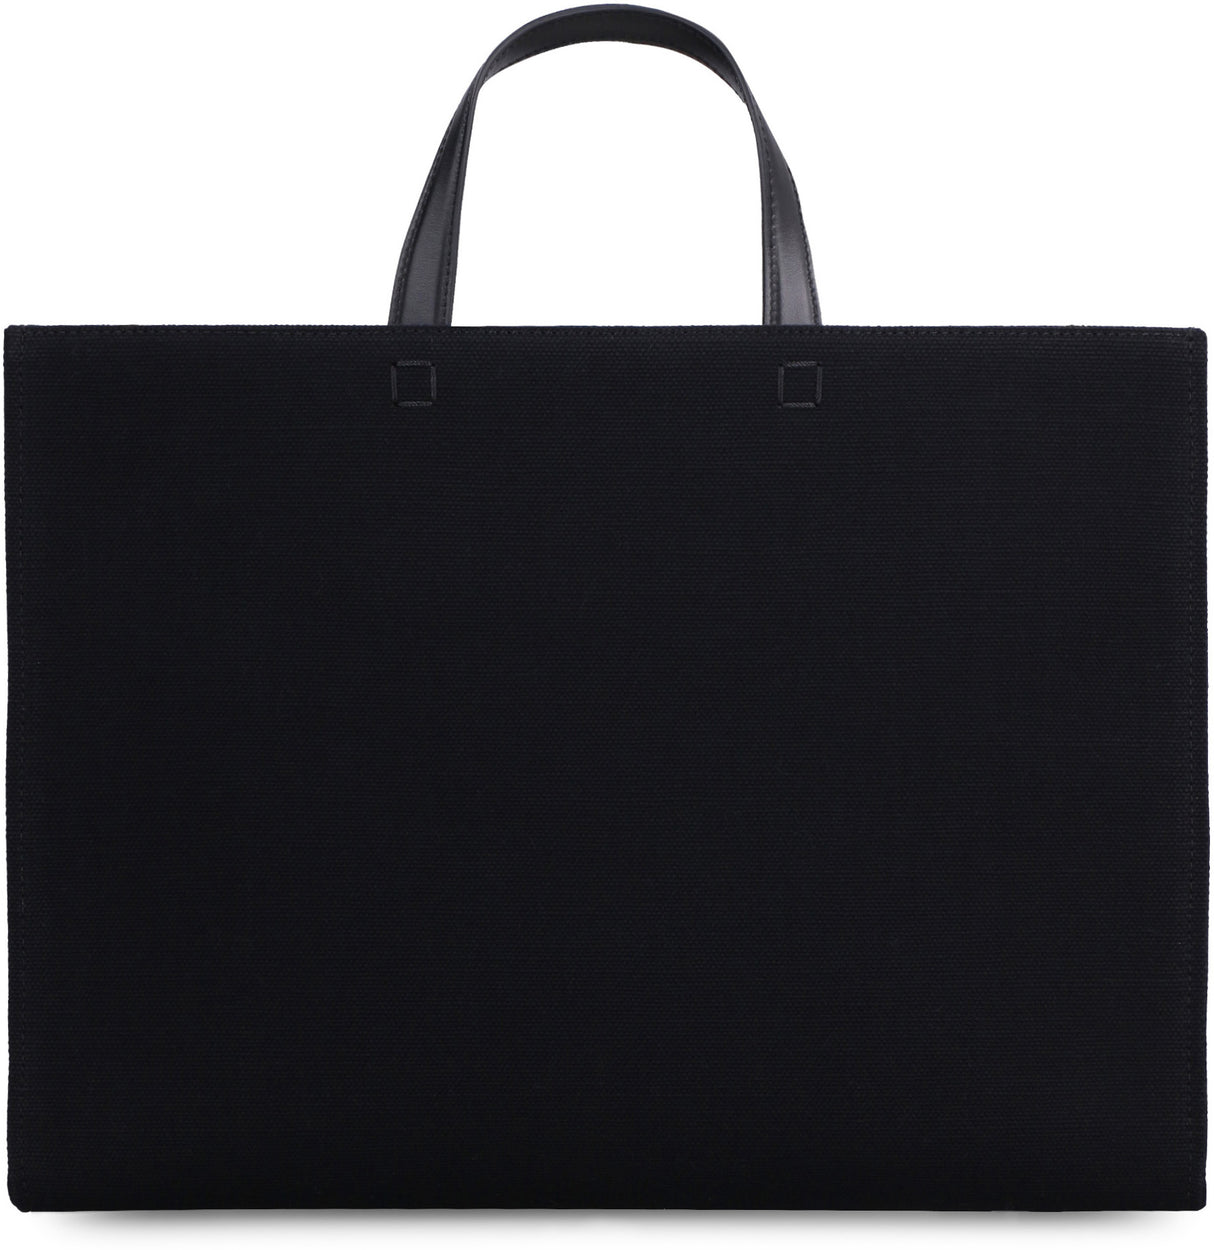 GIVENCHY Medium Dual-Handle Black Canvas Tote with Leather Accents and Gold-Tone Hardware